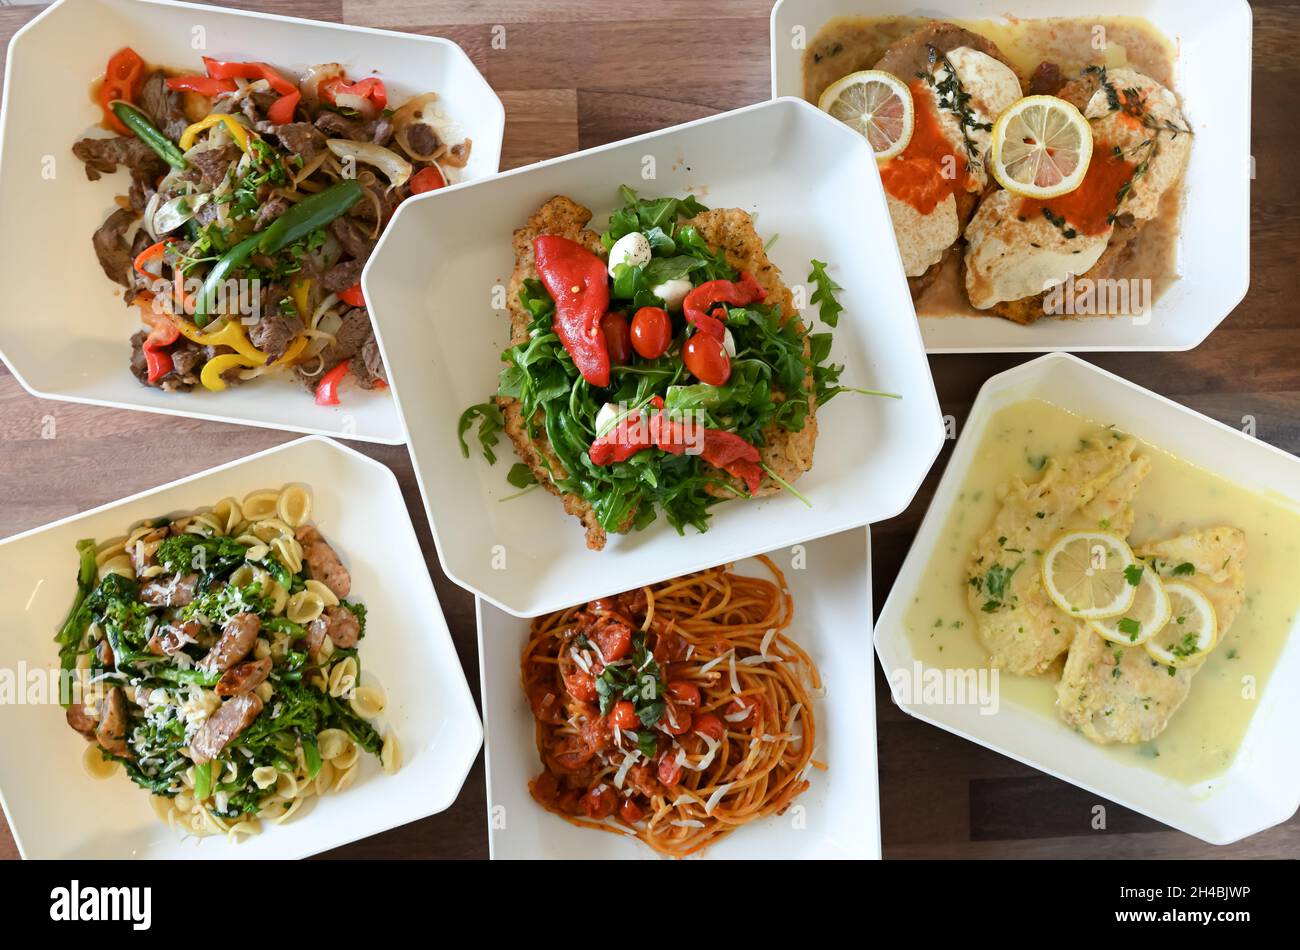 Regional Variations of Italian Fish and Pasta Dishes